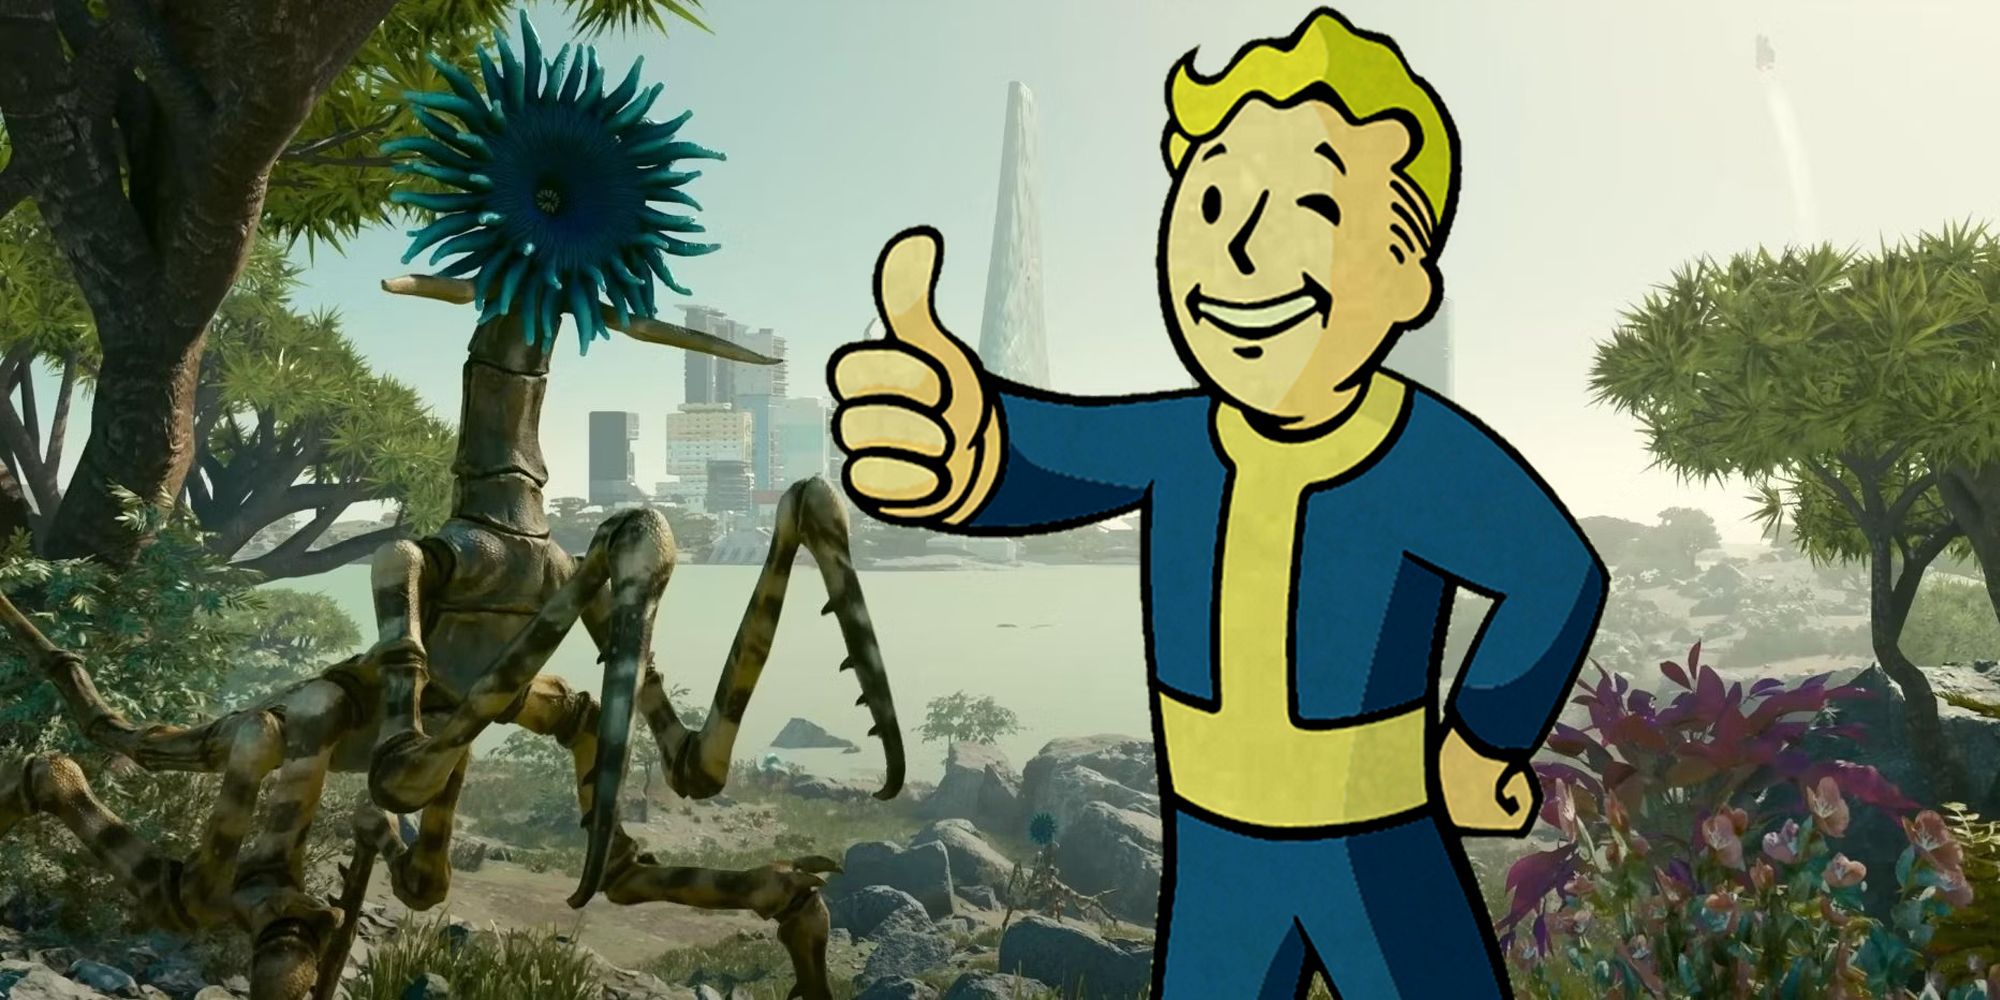 Fallout 4's Vault Boy with Starfield's Coralbug Scavenger outside New Atlantis